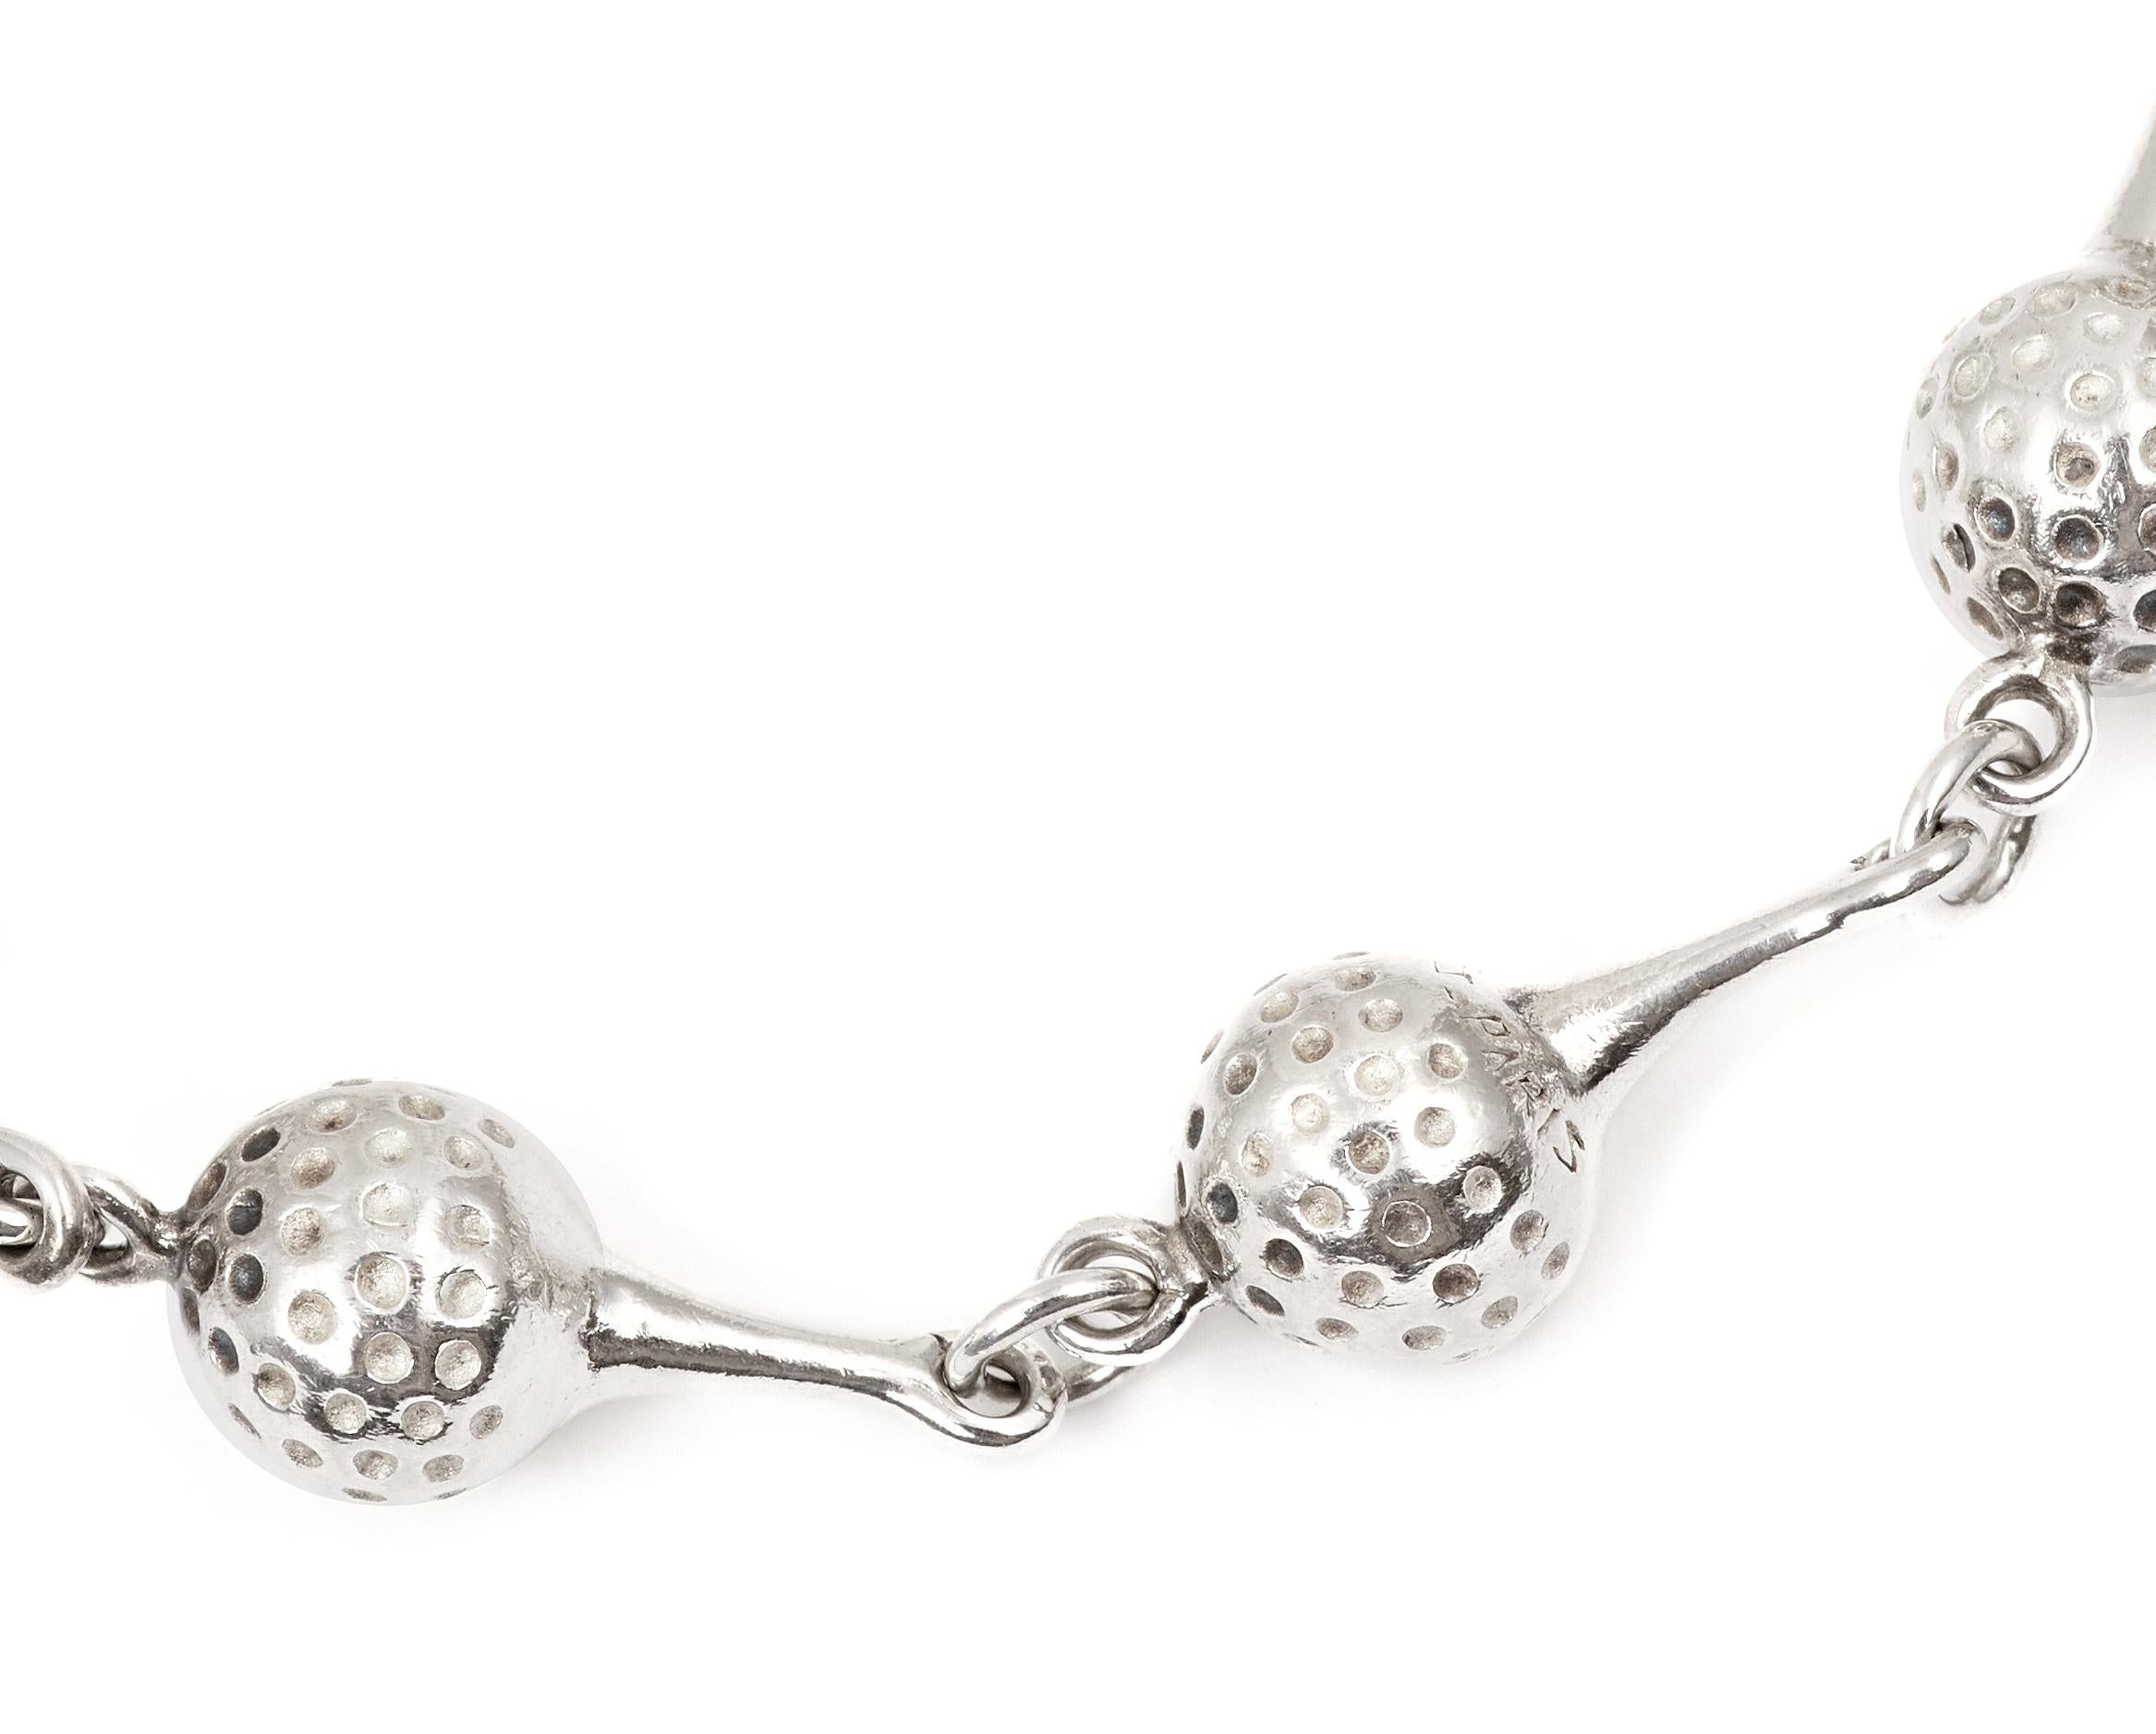 Hermès Bracelet with golf balls patterns.

Silver 925/000th.

Sold with its box.

Dimensions : 21 x 0.85 cm (8.2 x 0.31 inch)

Weight : 34 gr